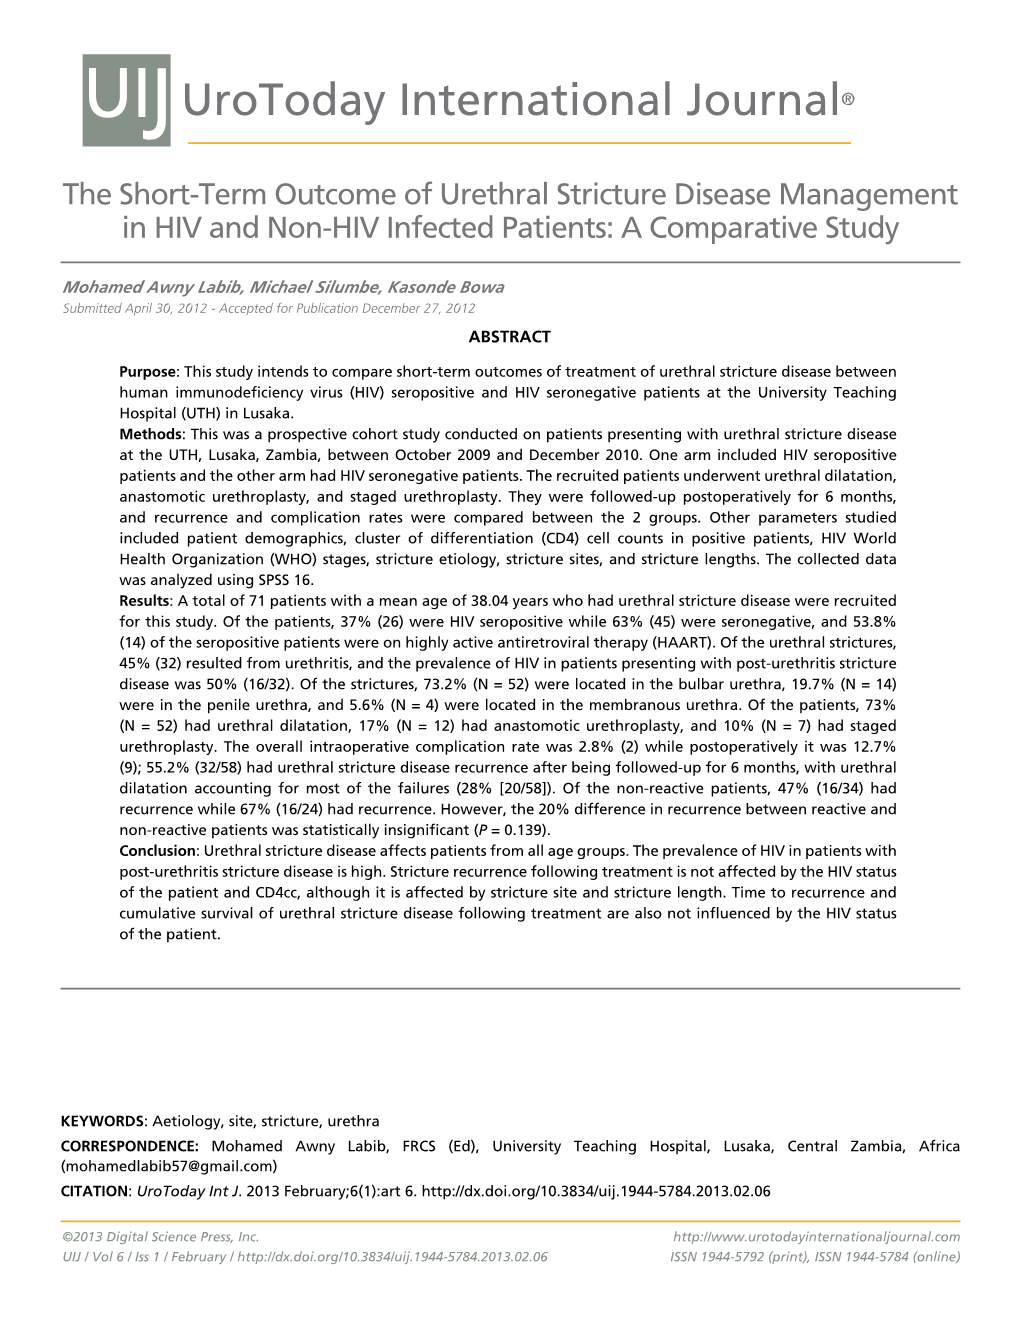 UIJ Urotoday International Journal® the Short-Term Outcome of Urethral Stricture Disease Management in HIV and Non-HIV Infected Patients: a Comparative Study